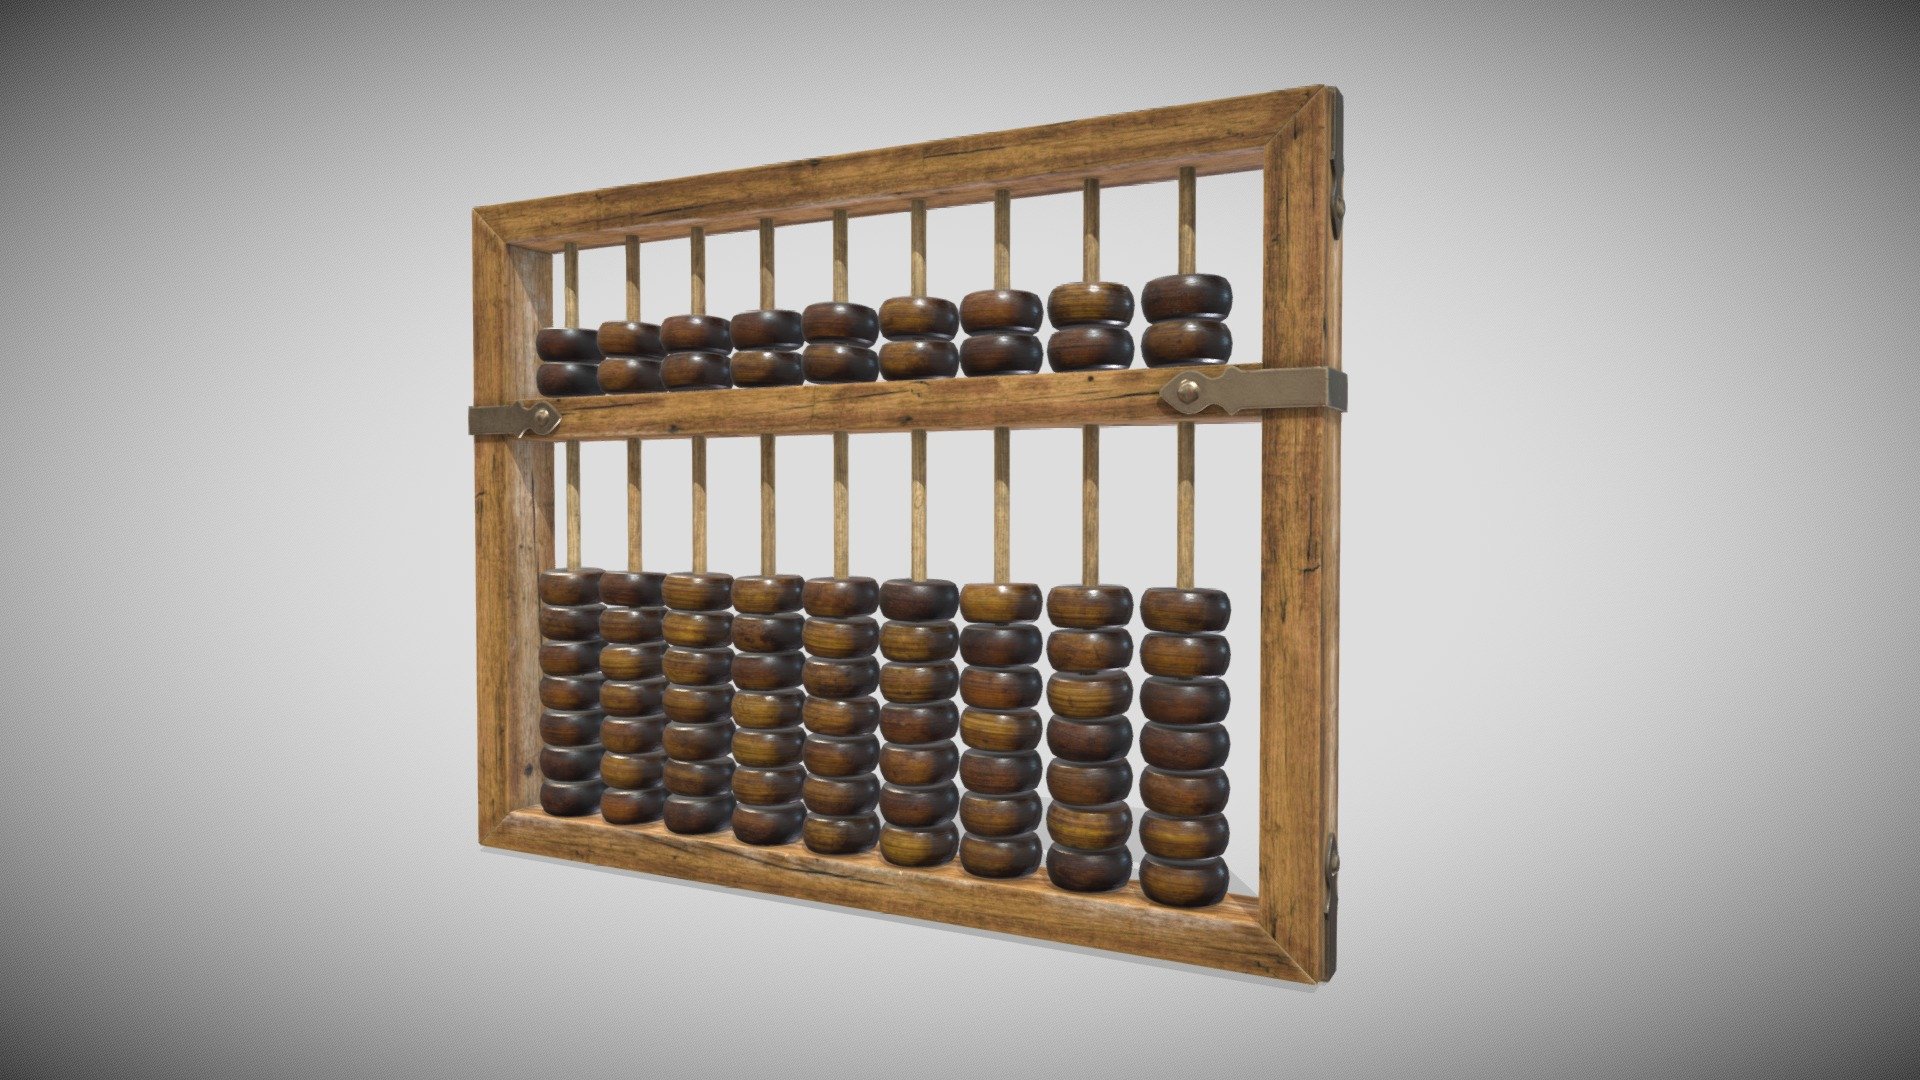 One Material PBR Metalness 4k

All Quads

Subdividible - Abacus - Buy Royalty Free 3D model by Francesco Coldesina (@topfrank2013) 3d model